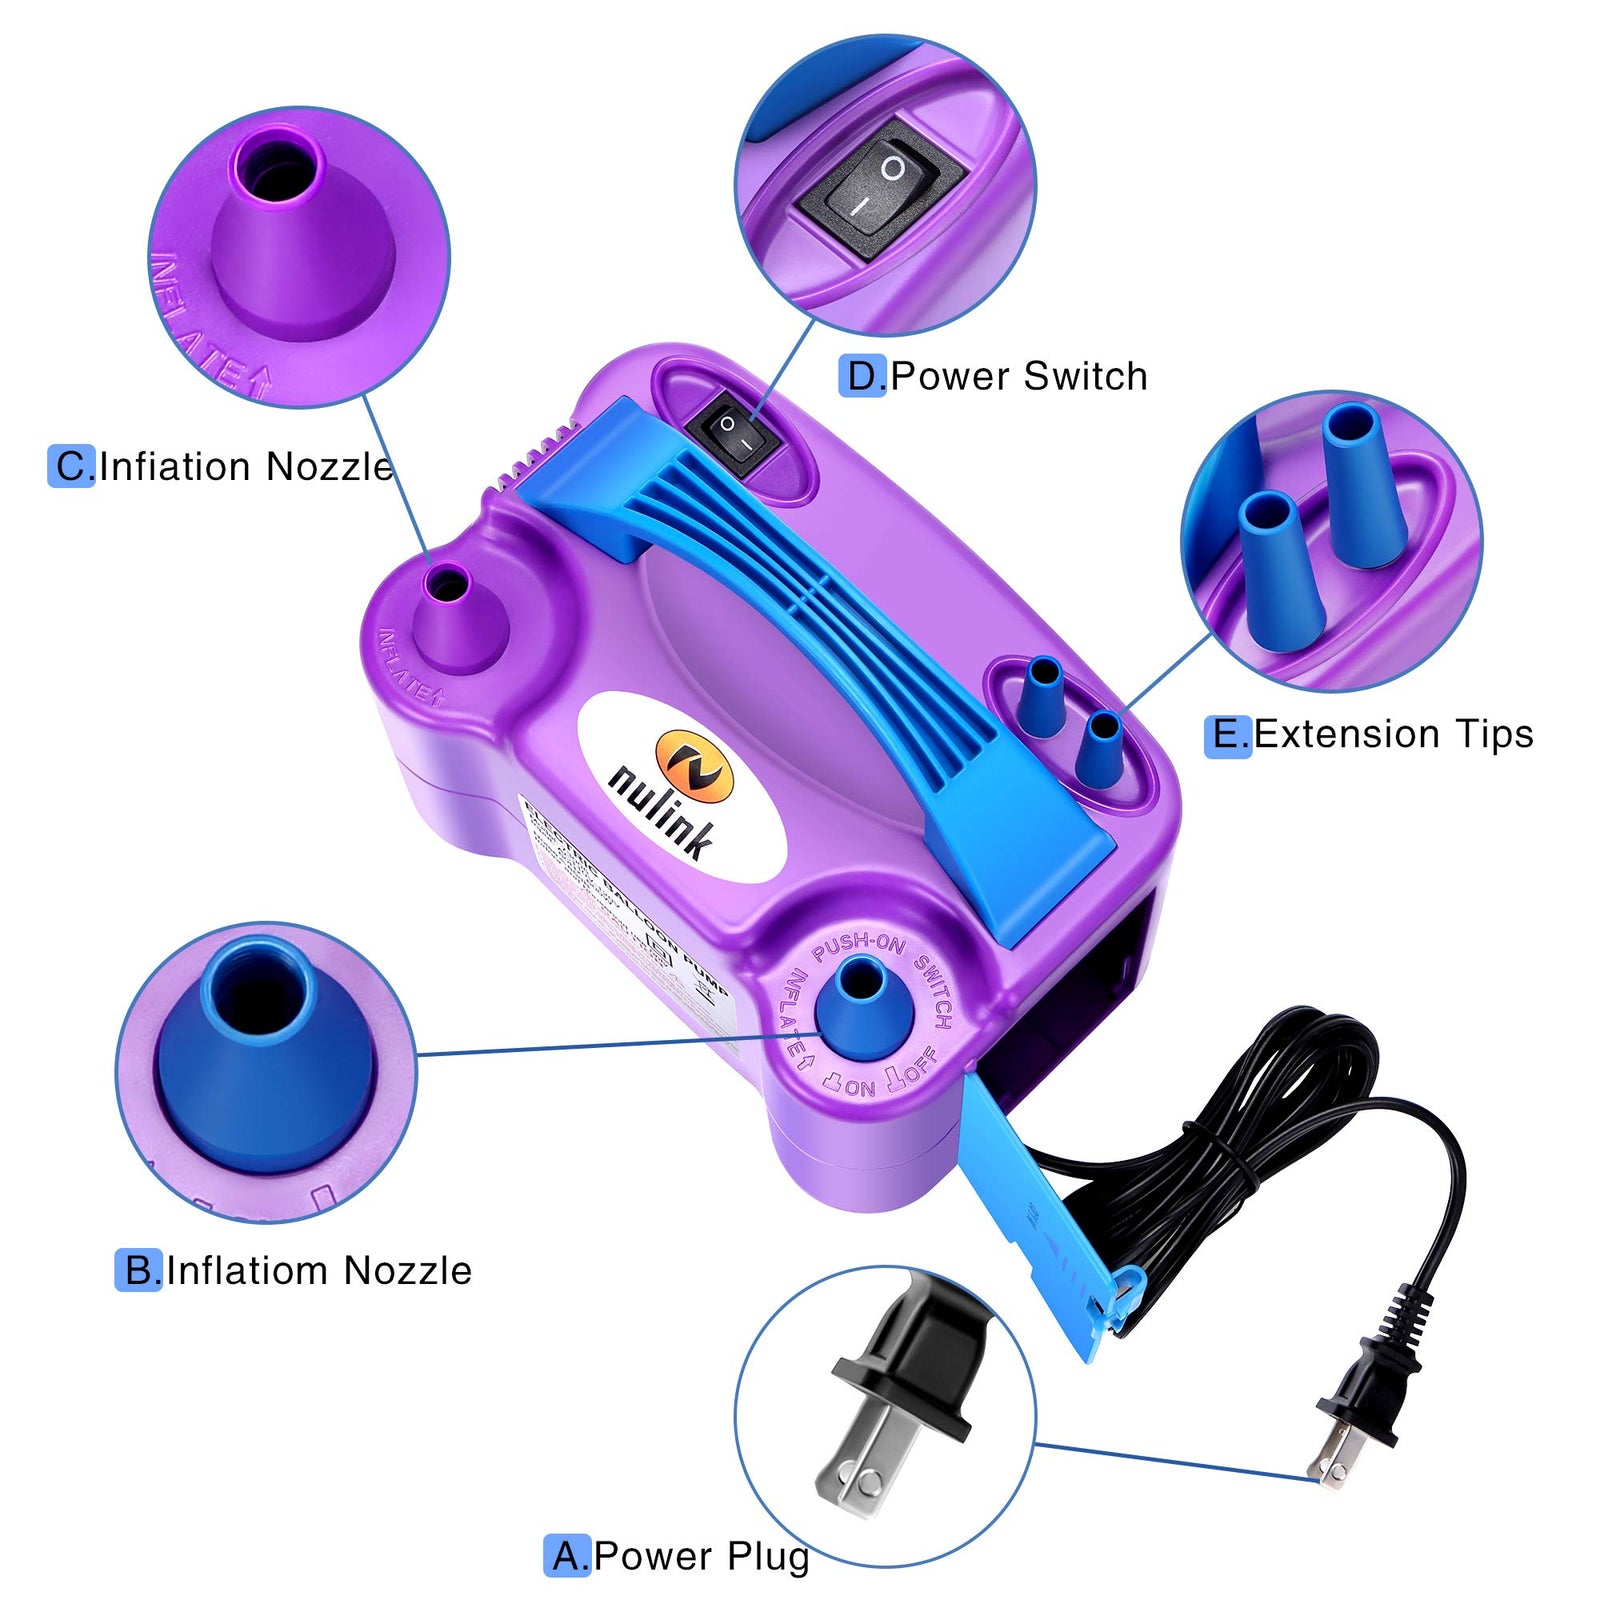 NuLink Electric Portable Dual Nozzle Balloon Blower Pump Inflation for Decoration, Party, Sport [110V~120V, 600W, Purple]